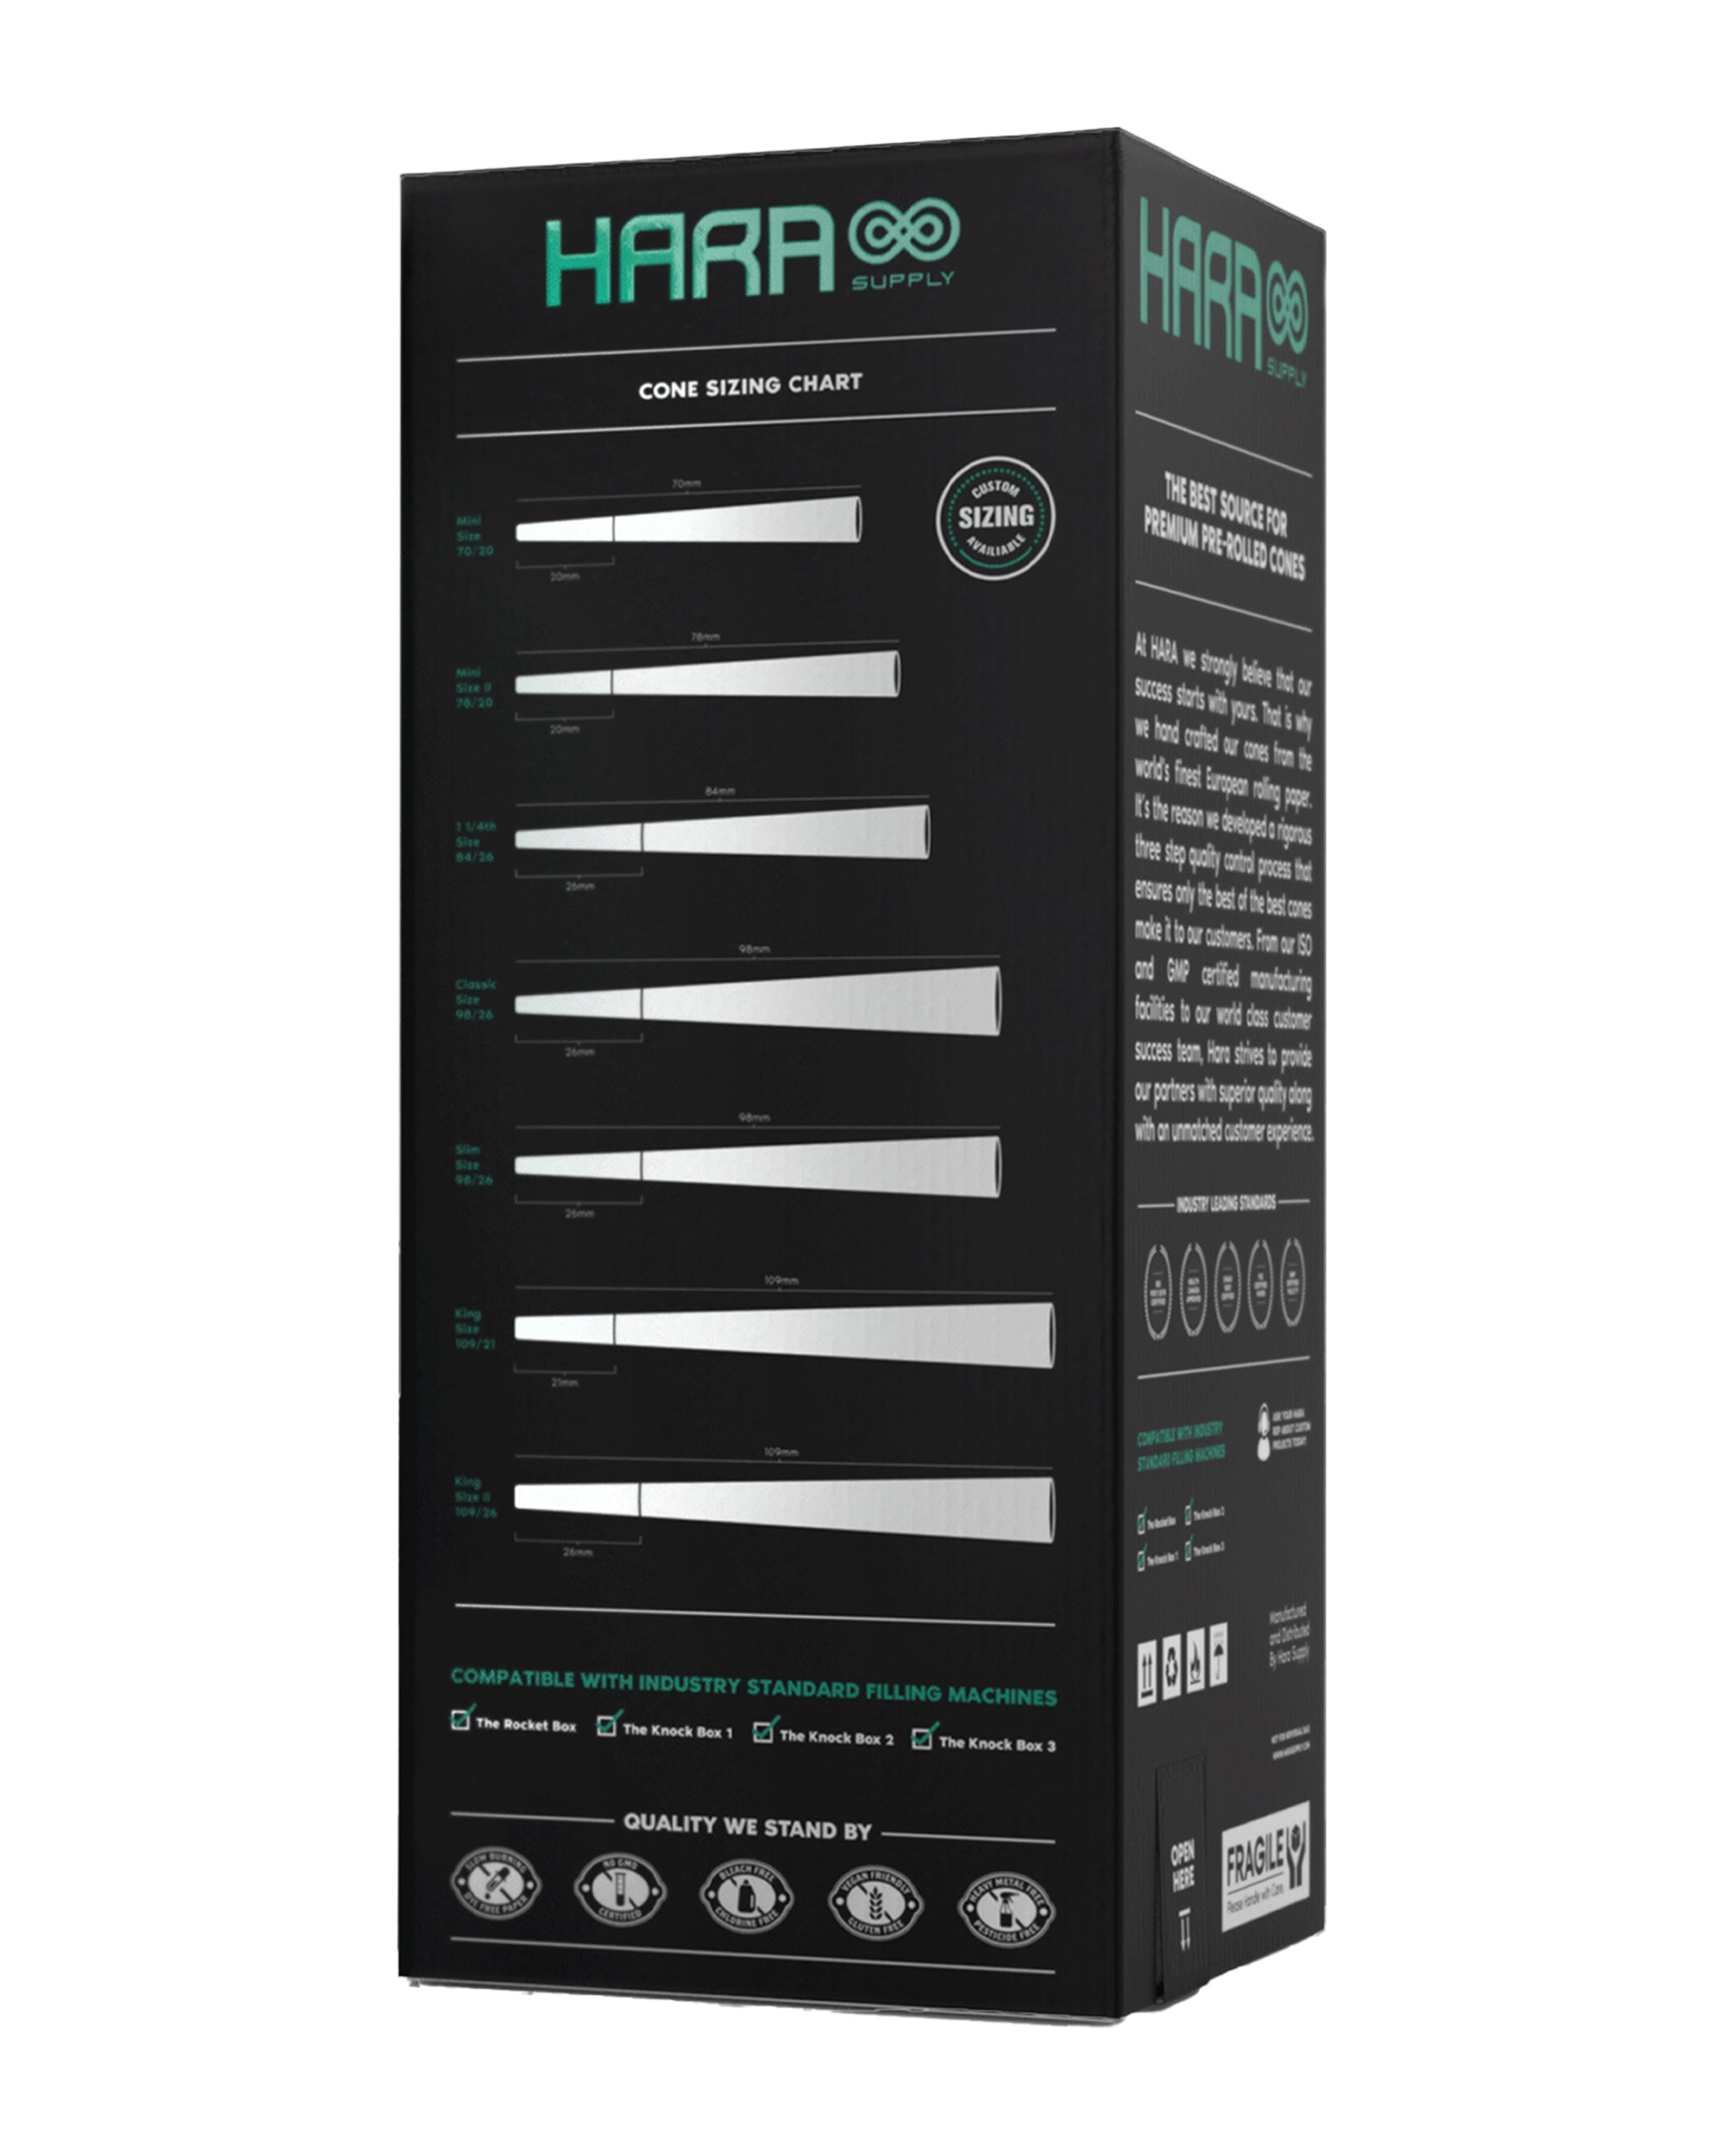 Hara Supply | 1 1/4 Size Unbleached Pre-Rolled Cones w/ Filter Tip | 84mm - Brown Paper - 900 Count